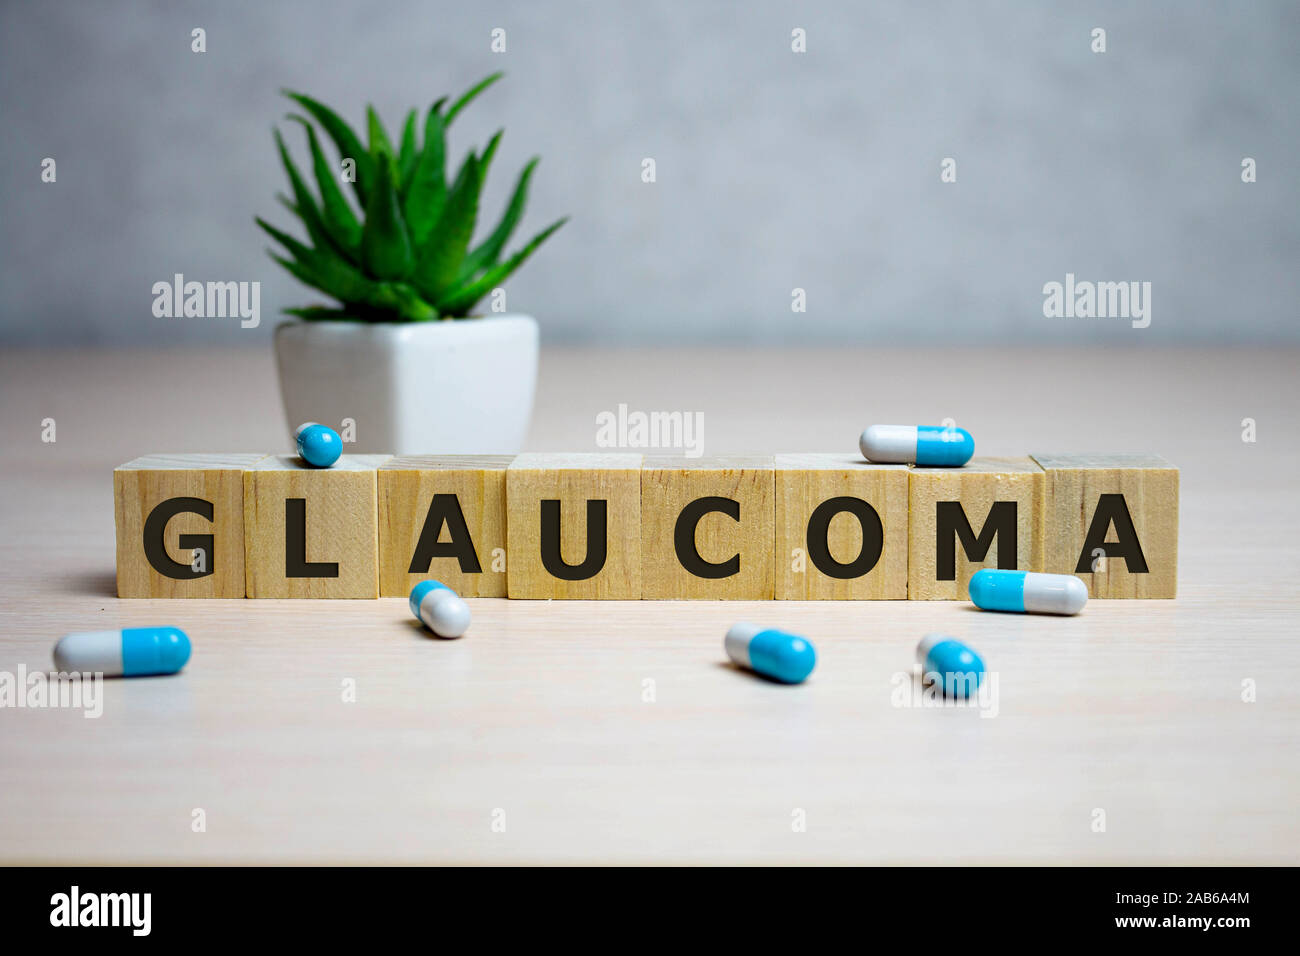 GLAUCOMA word made with building blocks, medical concept Stock Photo